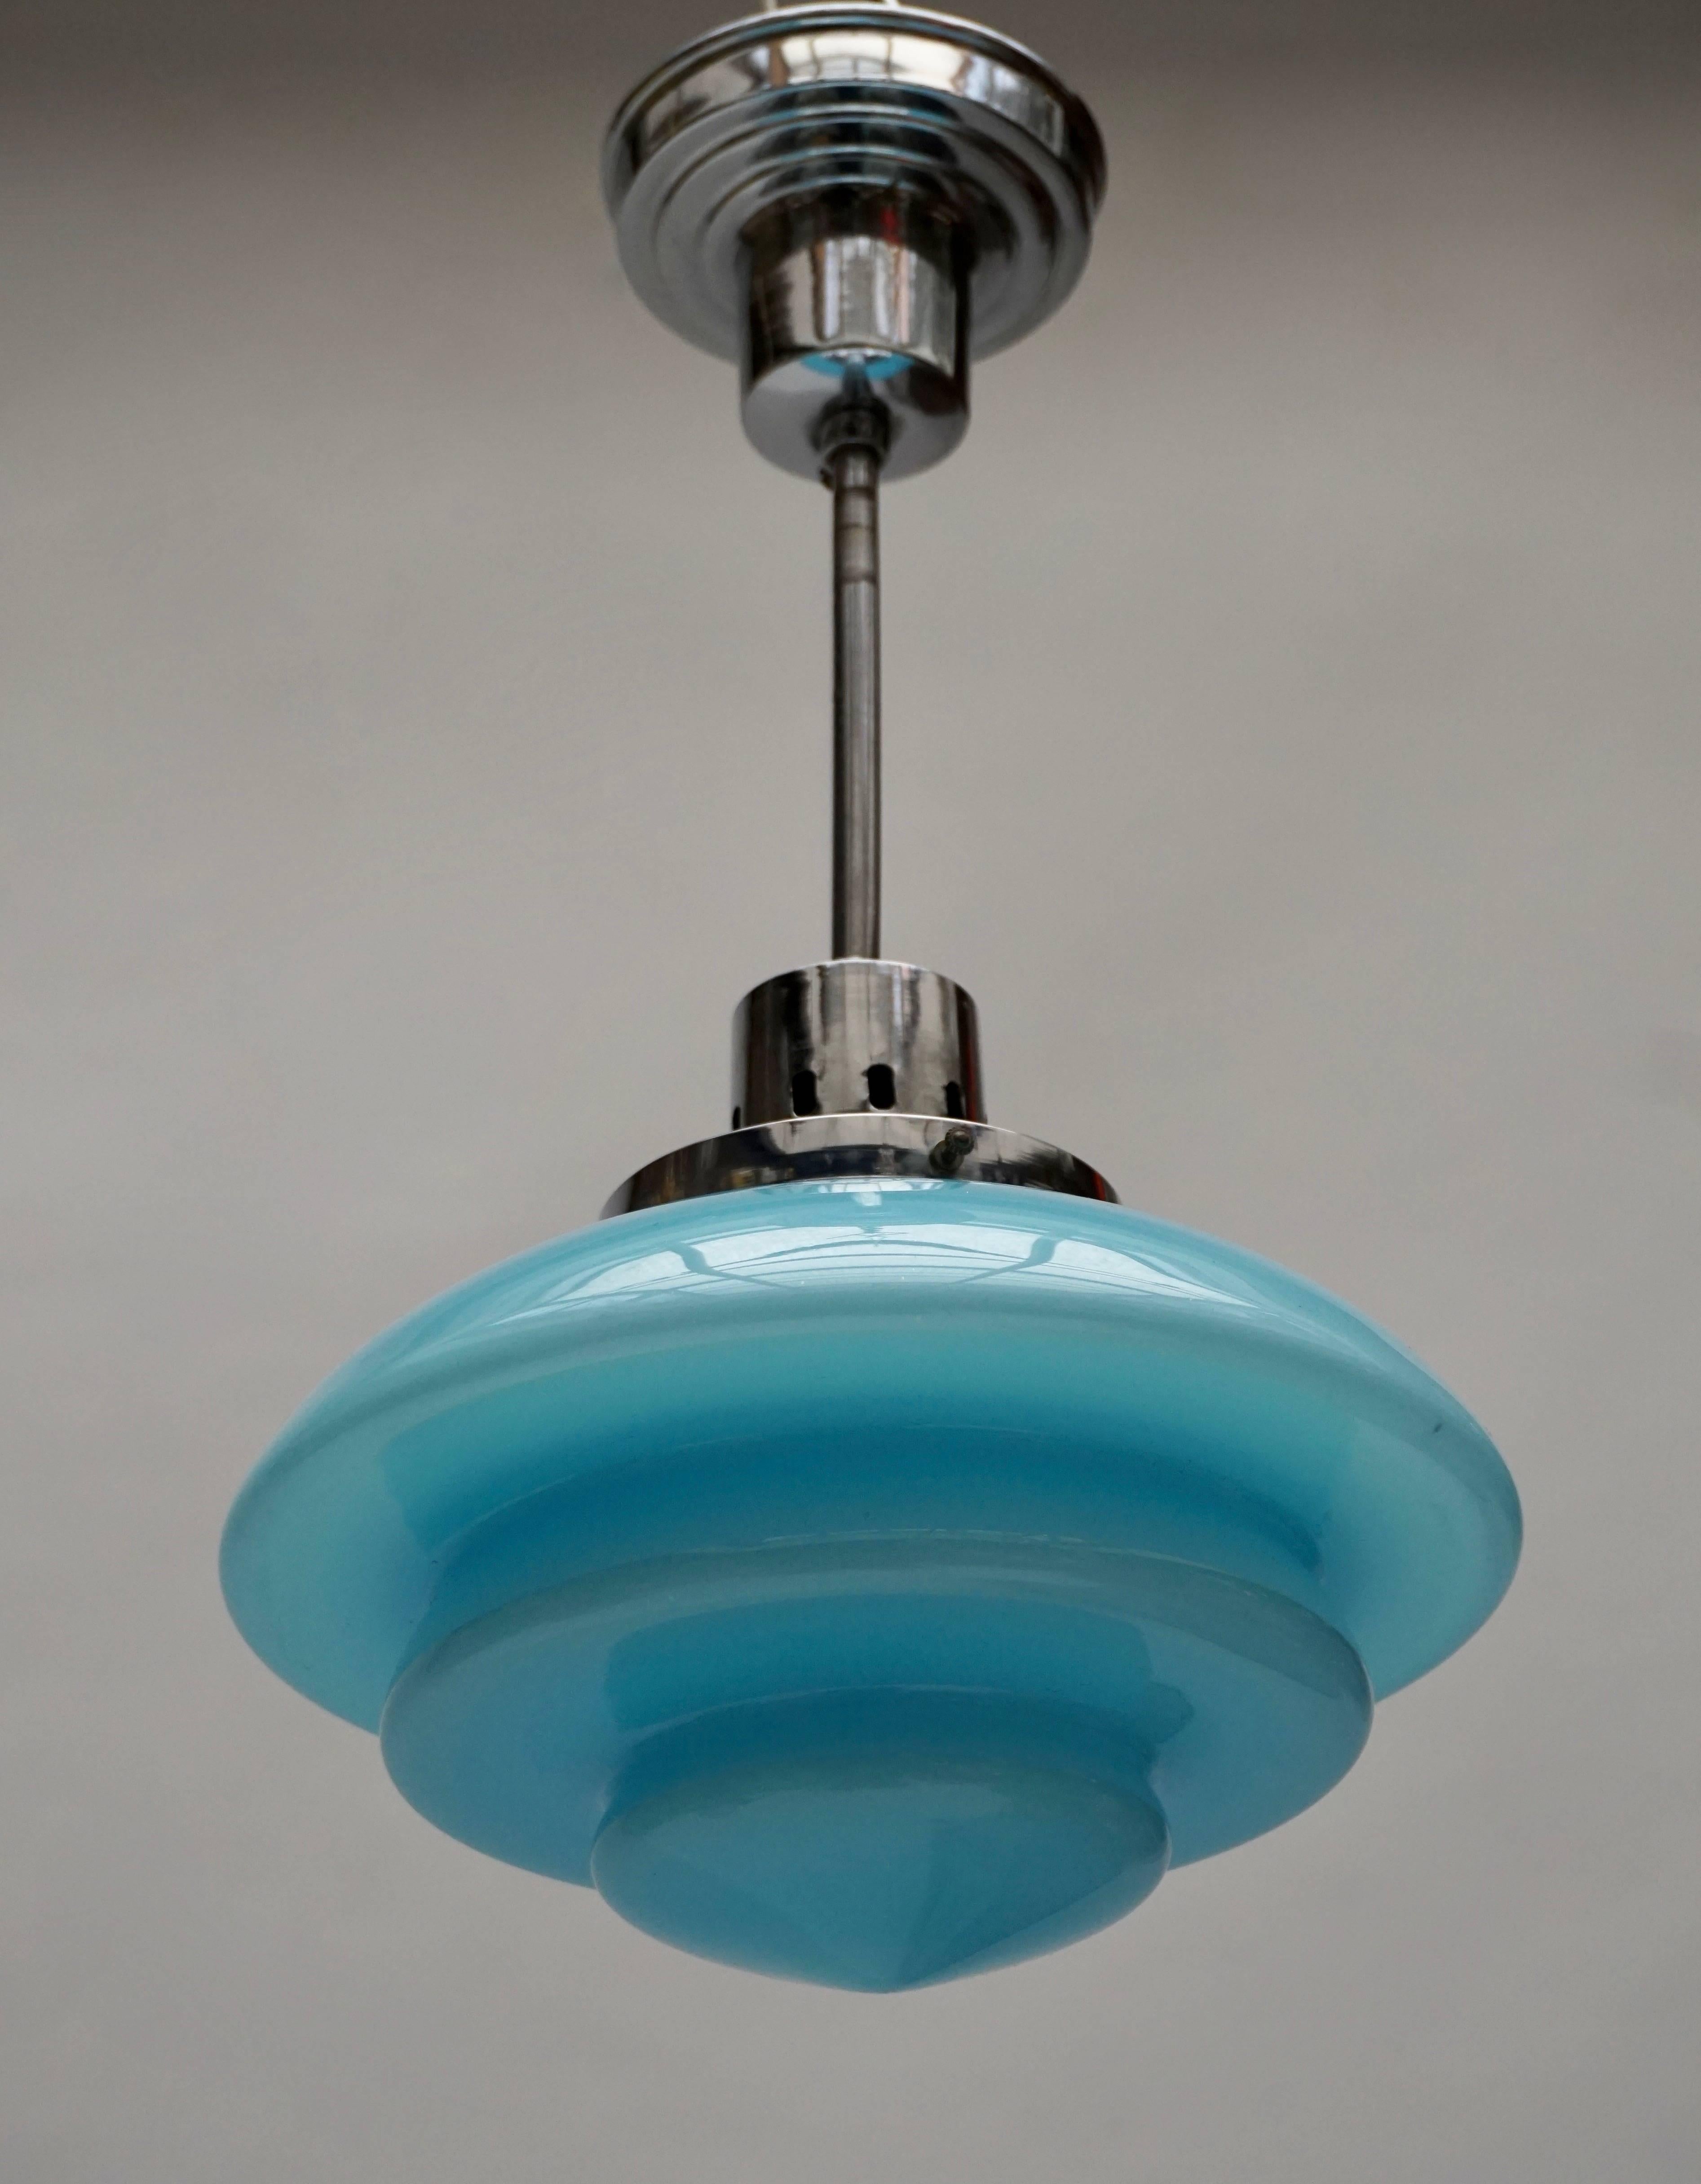 A pendant lamp in glass and by Paavo Tynell for Taito Oy, Finland ca. 1930's 

1930s Taito Art Deco Pendant Lamp
Materials: Chromed metal (iron and brass). Light blue hand blown crystal glass “opaline” opal diffuser. Brass and porcelain